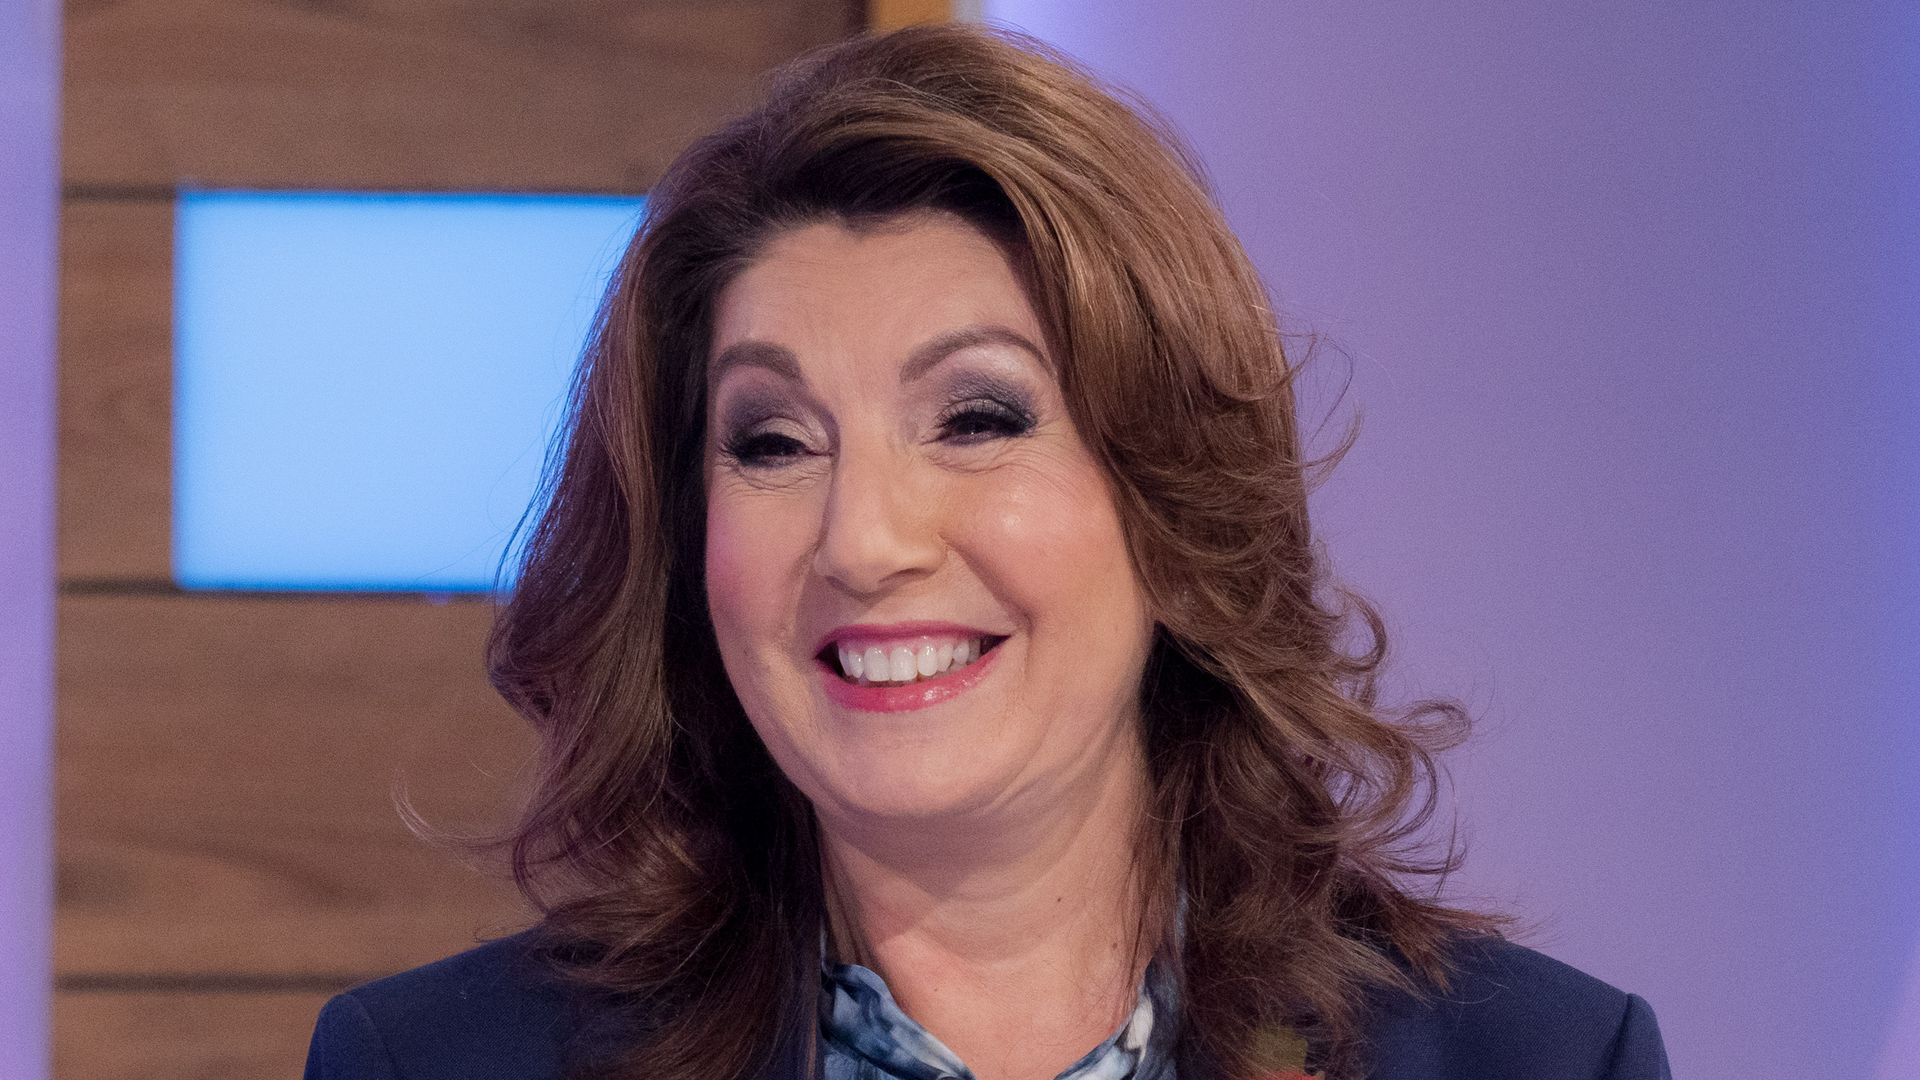 Jane McDonald in blue outfit